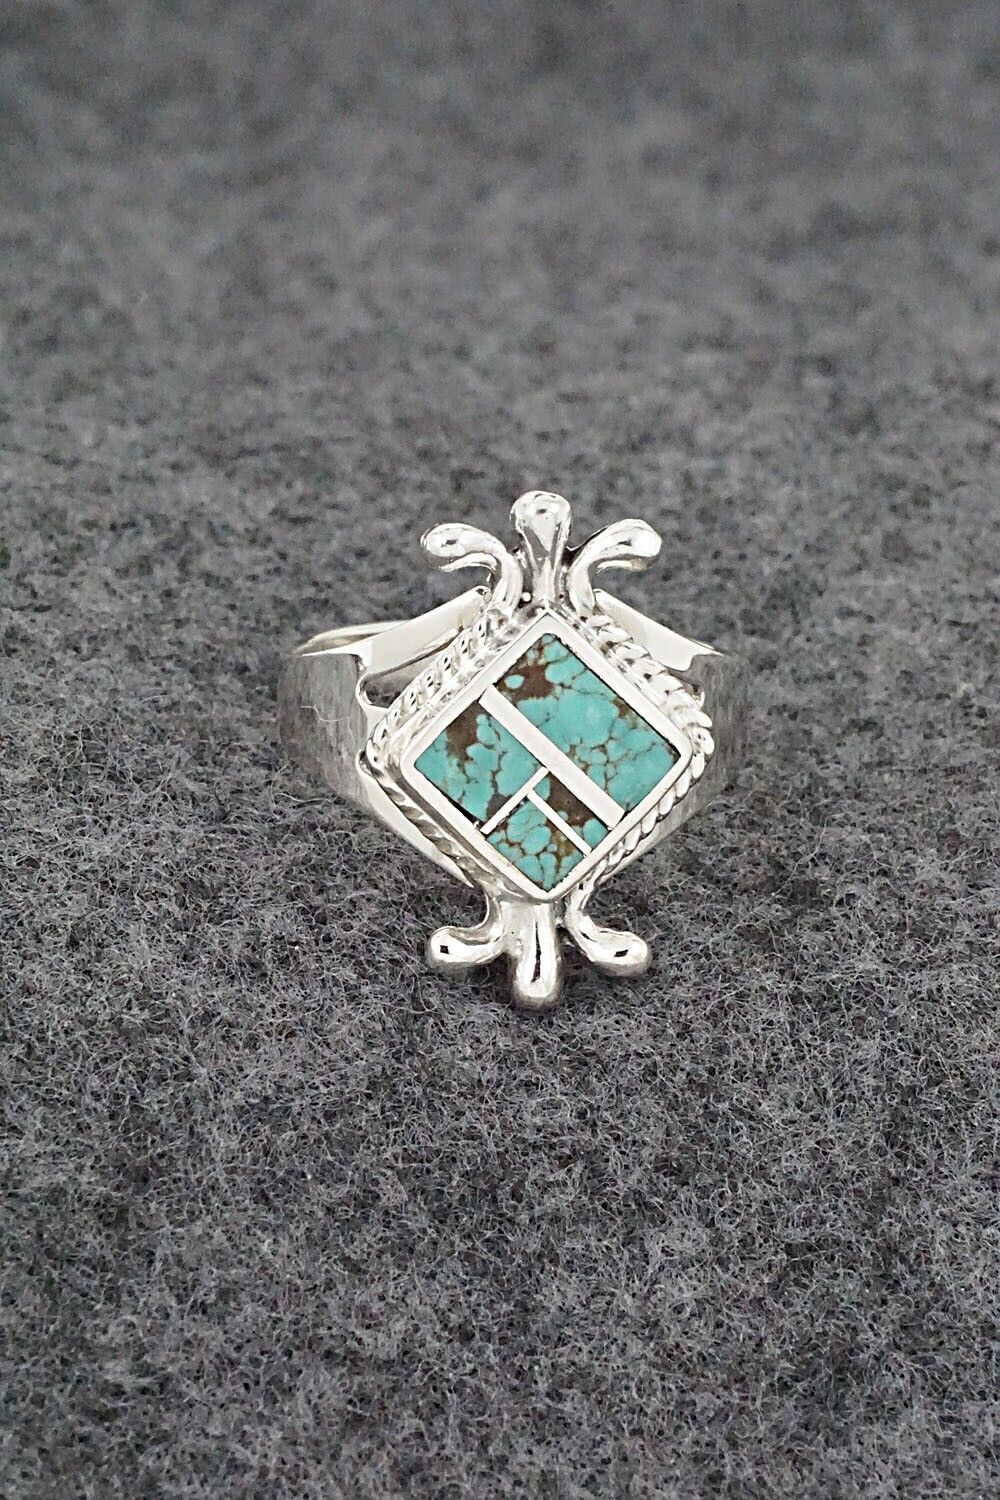 Turquoise & Sterling Silver Inlay Ring - James Manygoats - Size 8